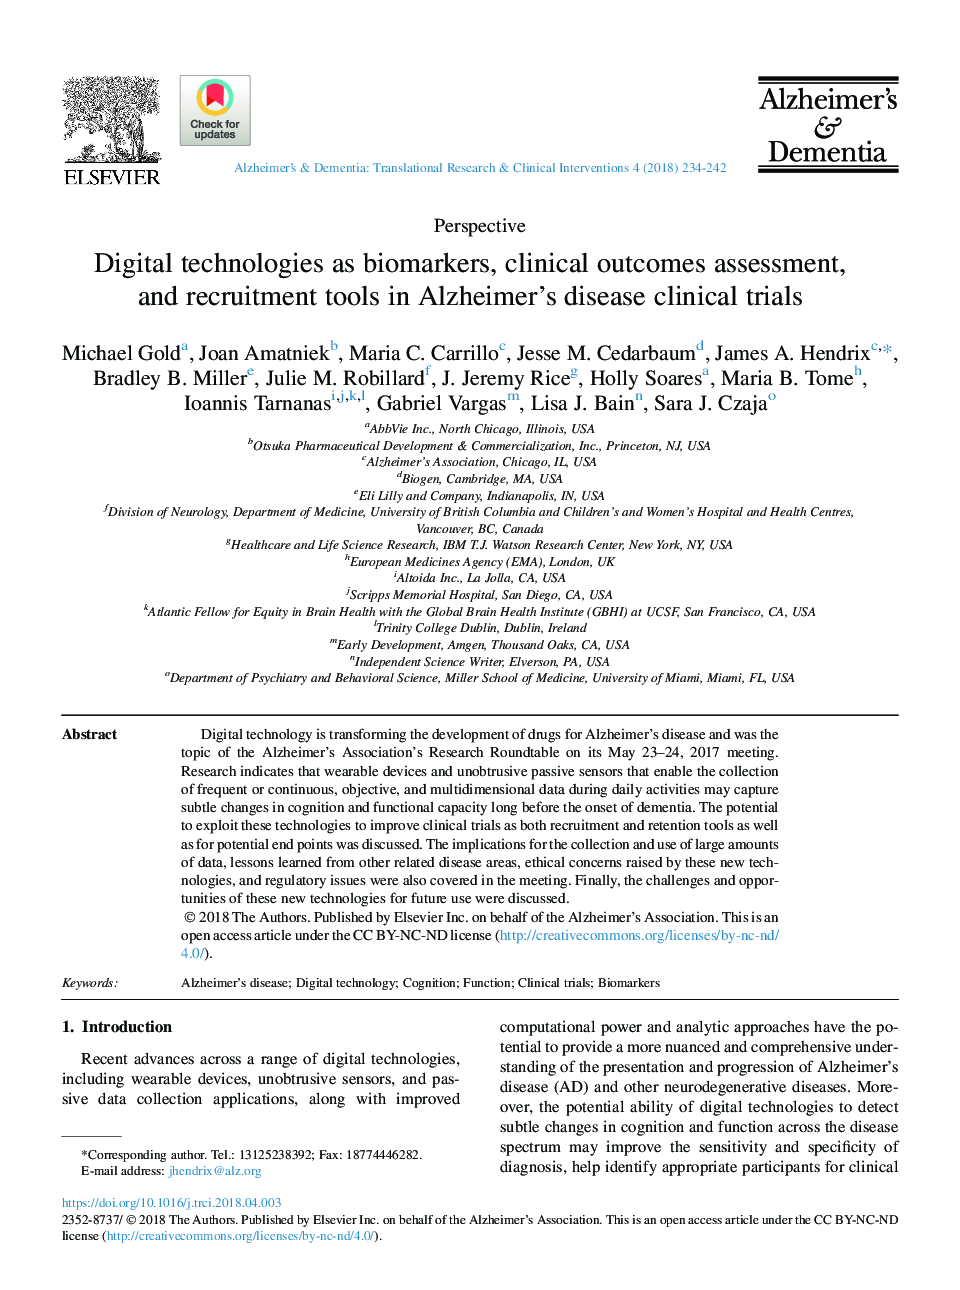 Digital technologies as biomarkers, clinical outcomes assessment, and recruitment tools in Alzheimer's disease clinical trials